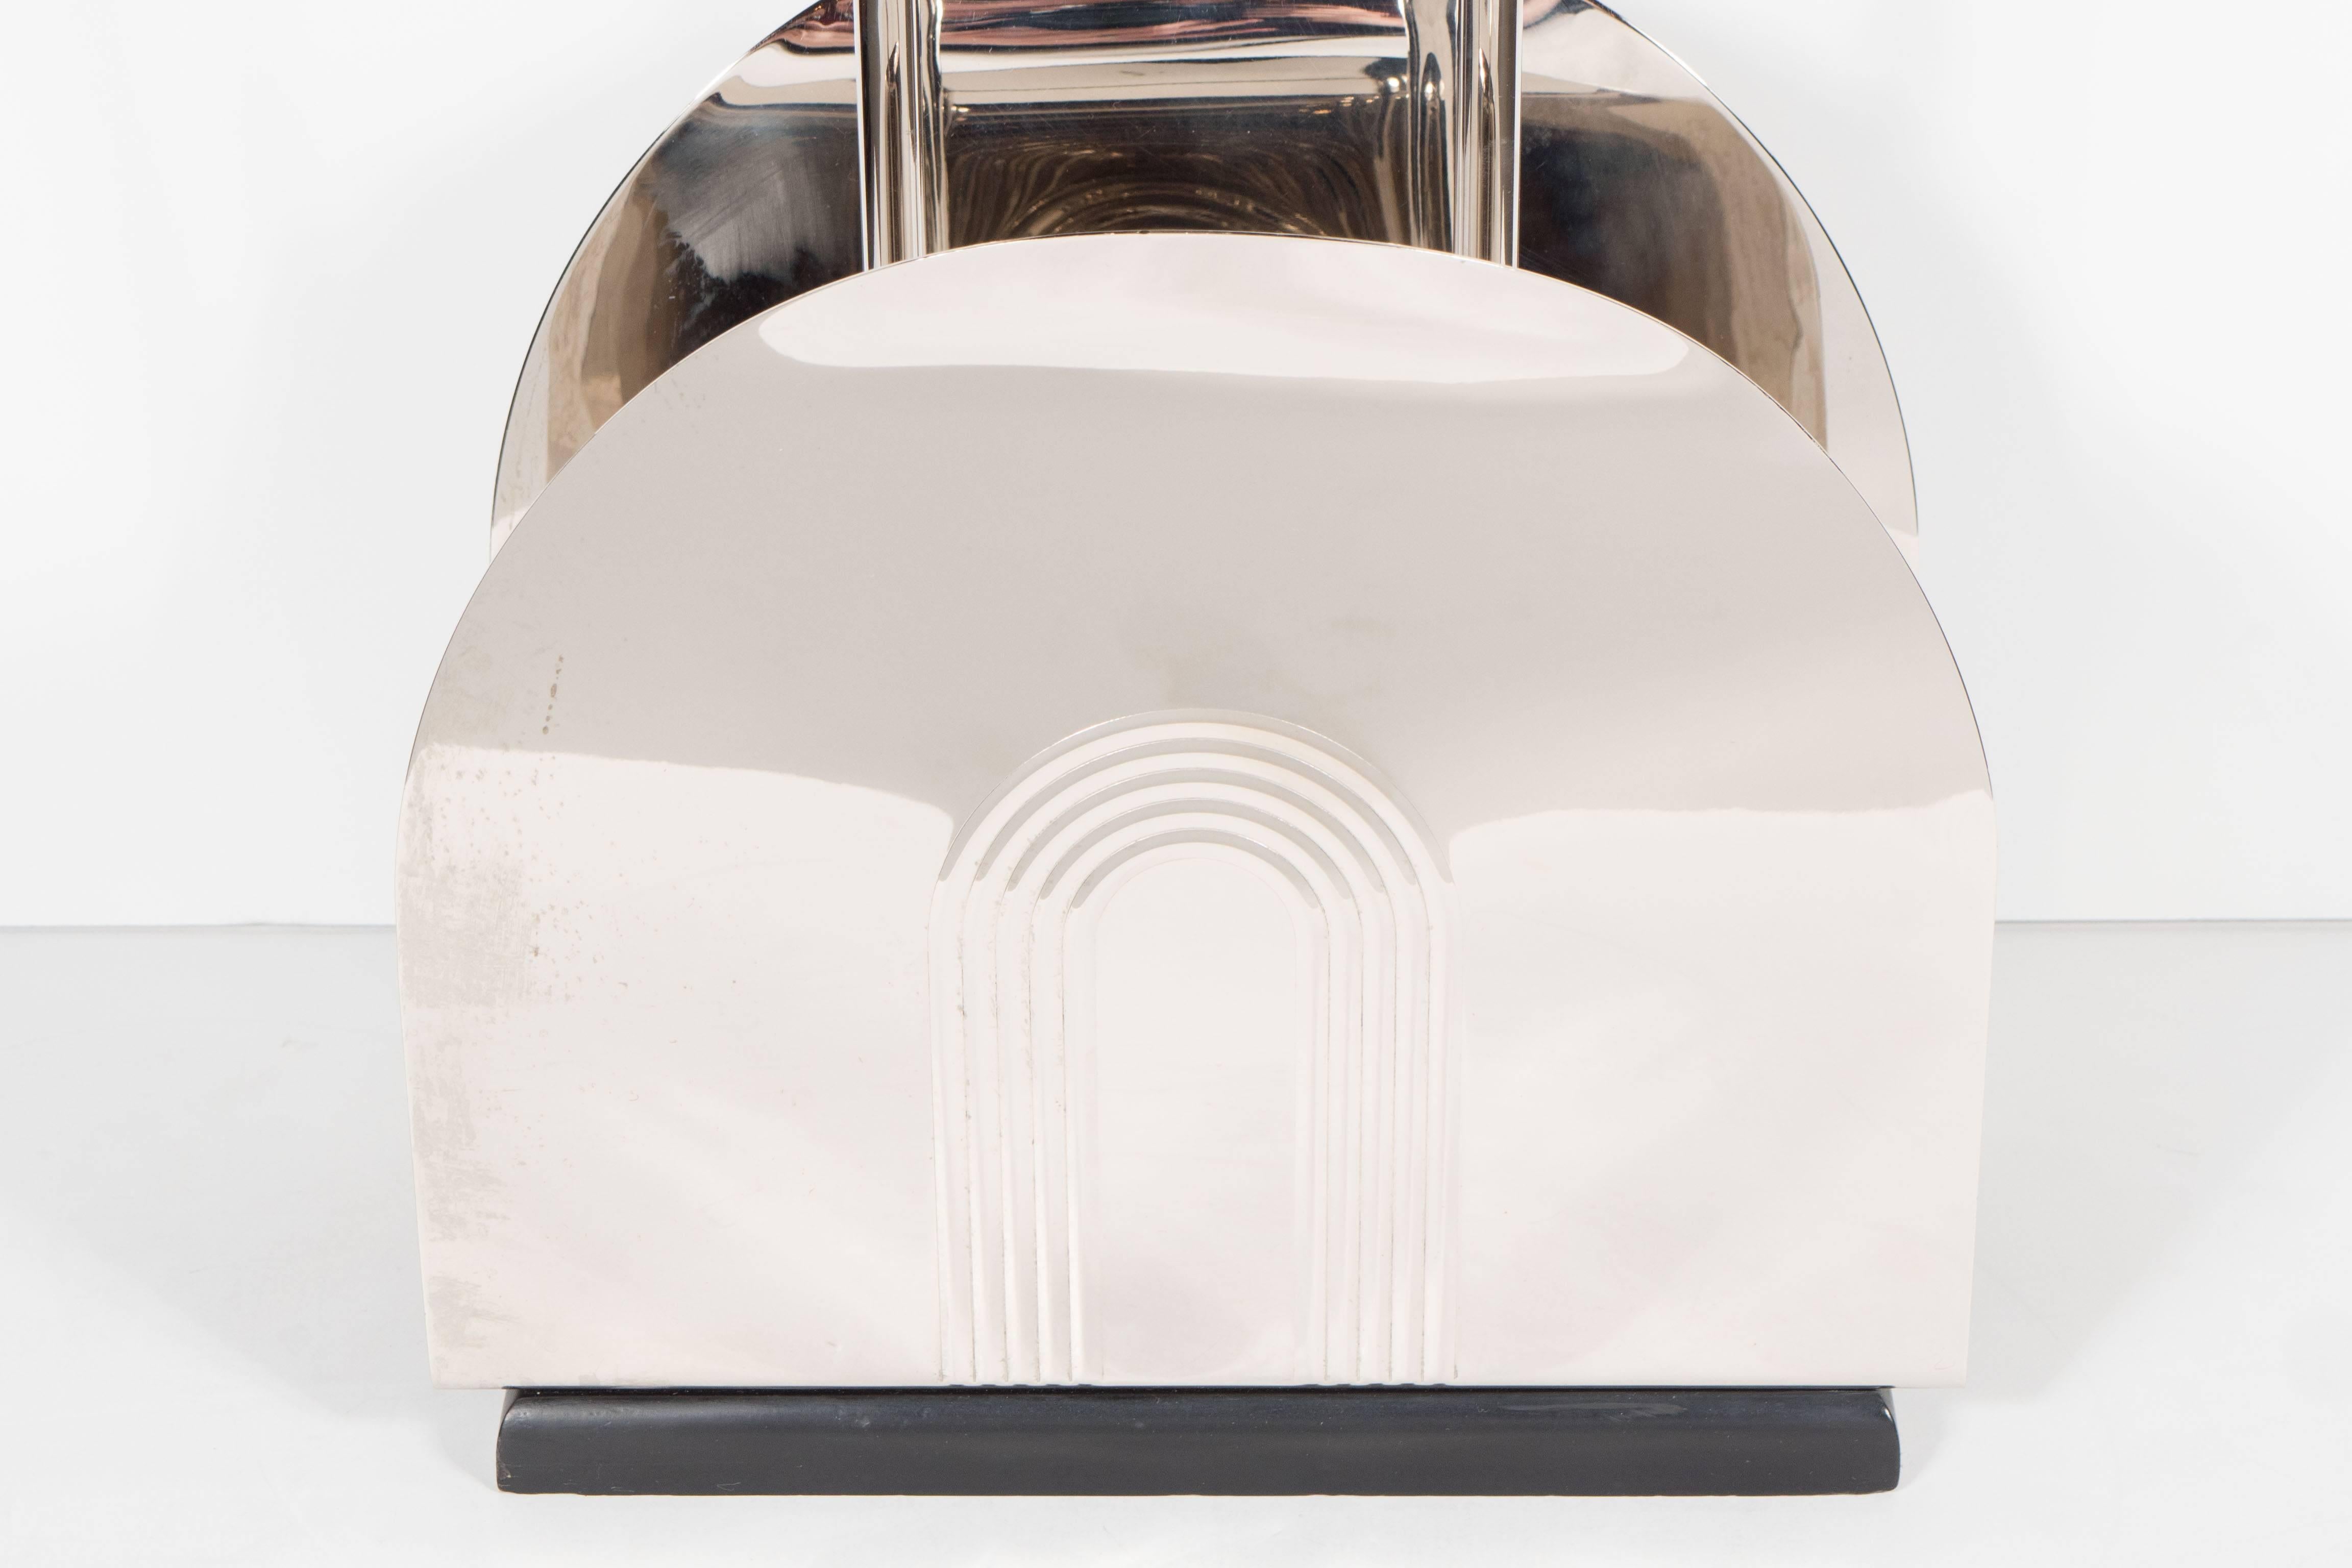 A streamlined Art Deco magazine stand in polished nickel and black enamel base. This rare magazine stand features a streamline arched design with relief stepped skyscraper style arches on both sides all in polished nickel resting on a black enamel